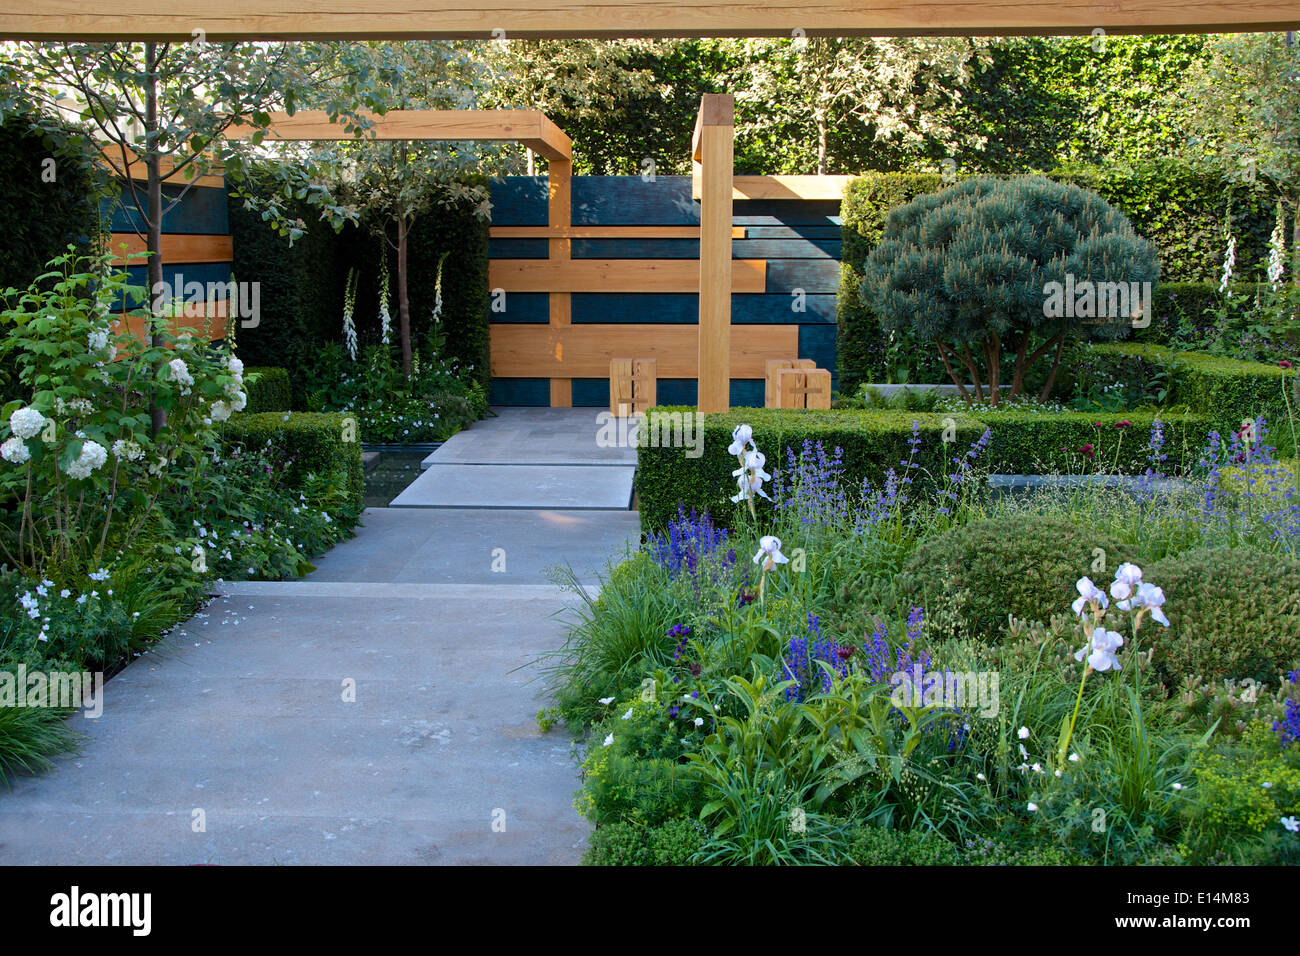 The Extending Space Garden at RHS Chelsea Flower Show 2014 designed by Nicole Fischer and Daniel Auderset Stock Photo